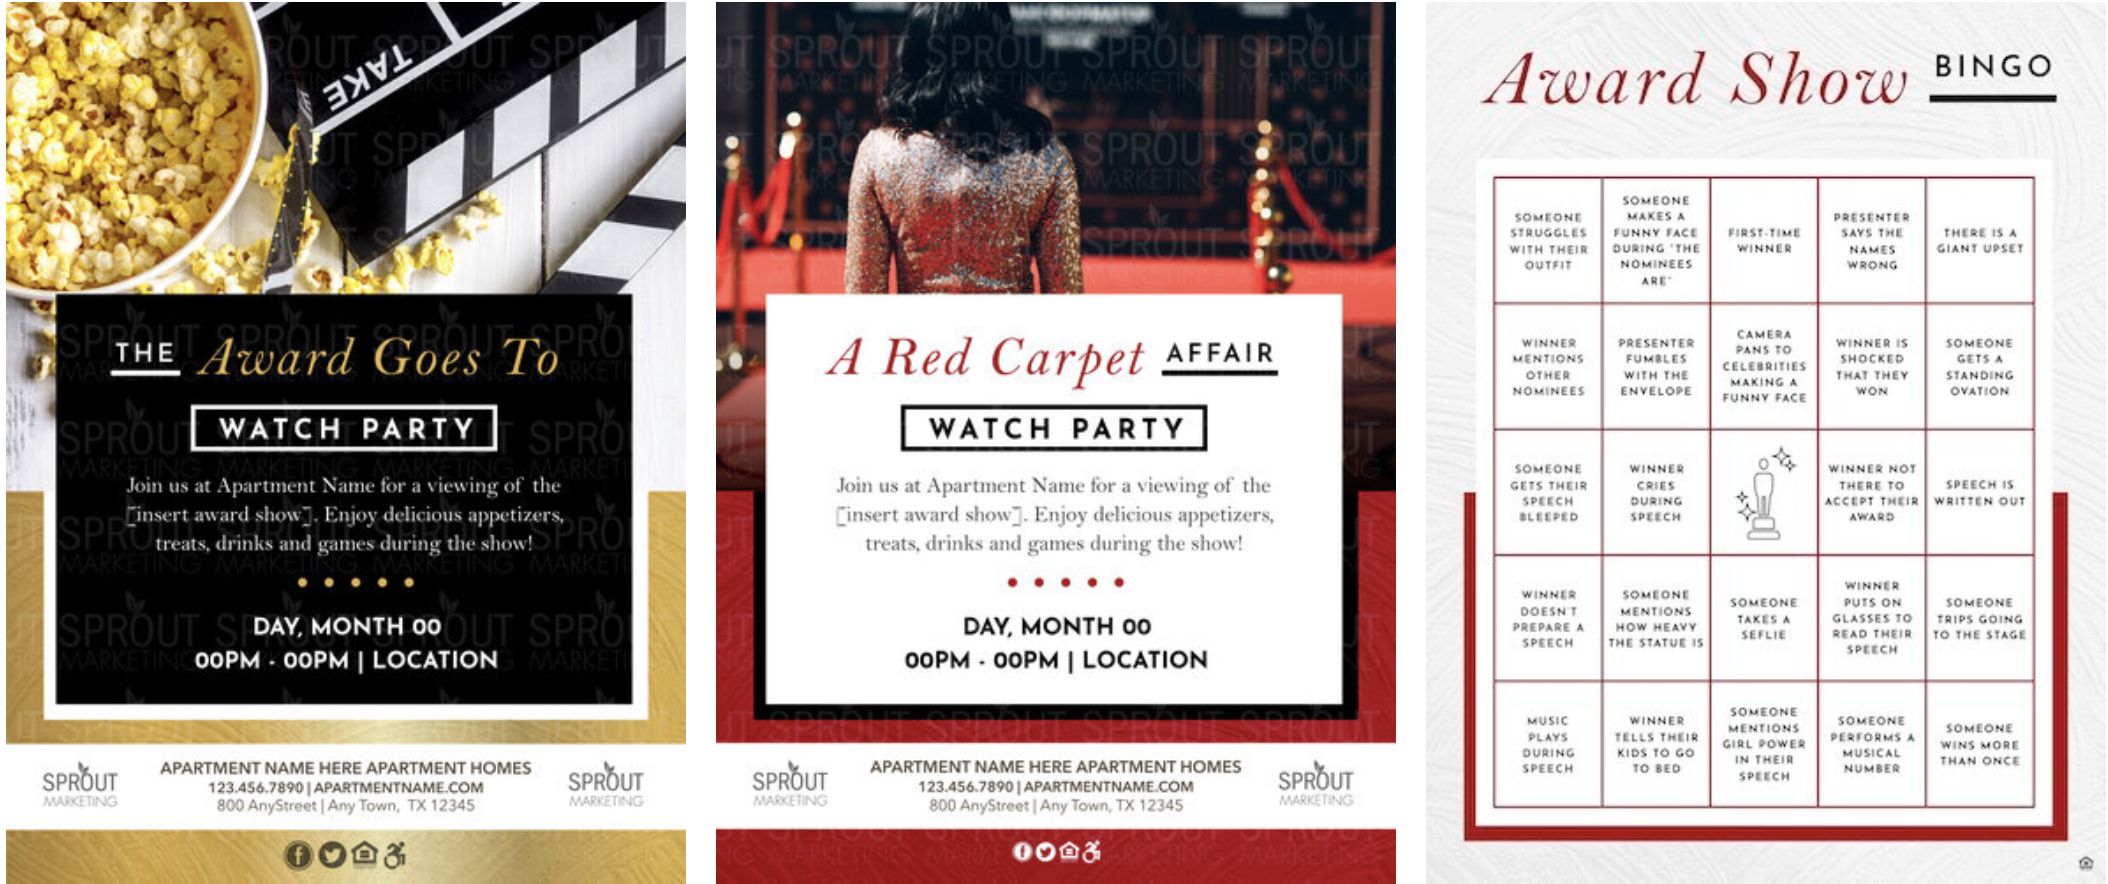 Resident Events That Deserve Their Own Red Carpet [Plus Super Bowl Fun]! —  Sprout Marketing